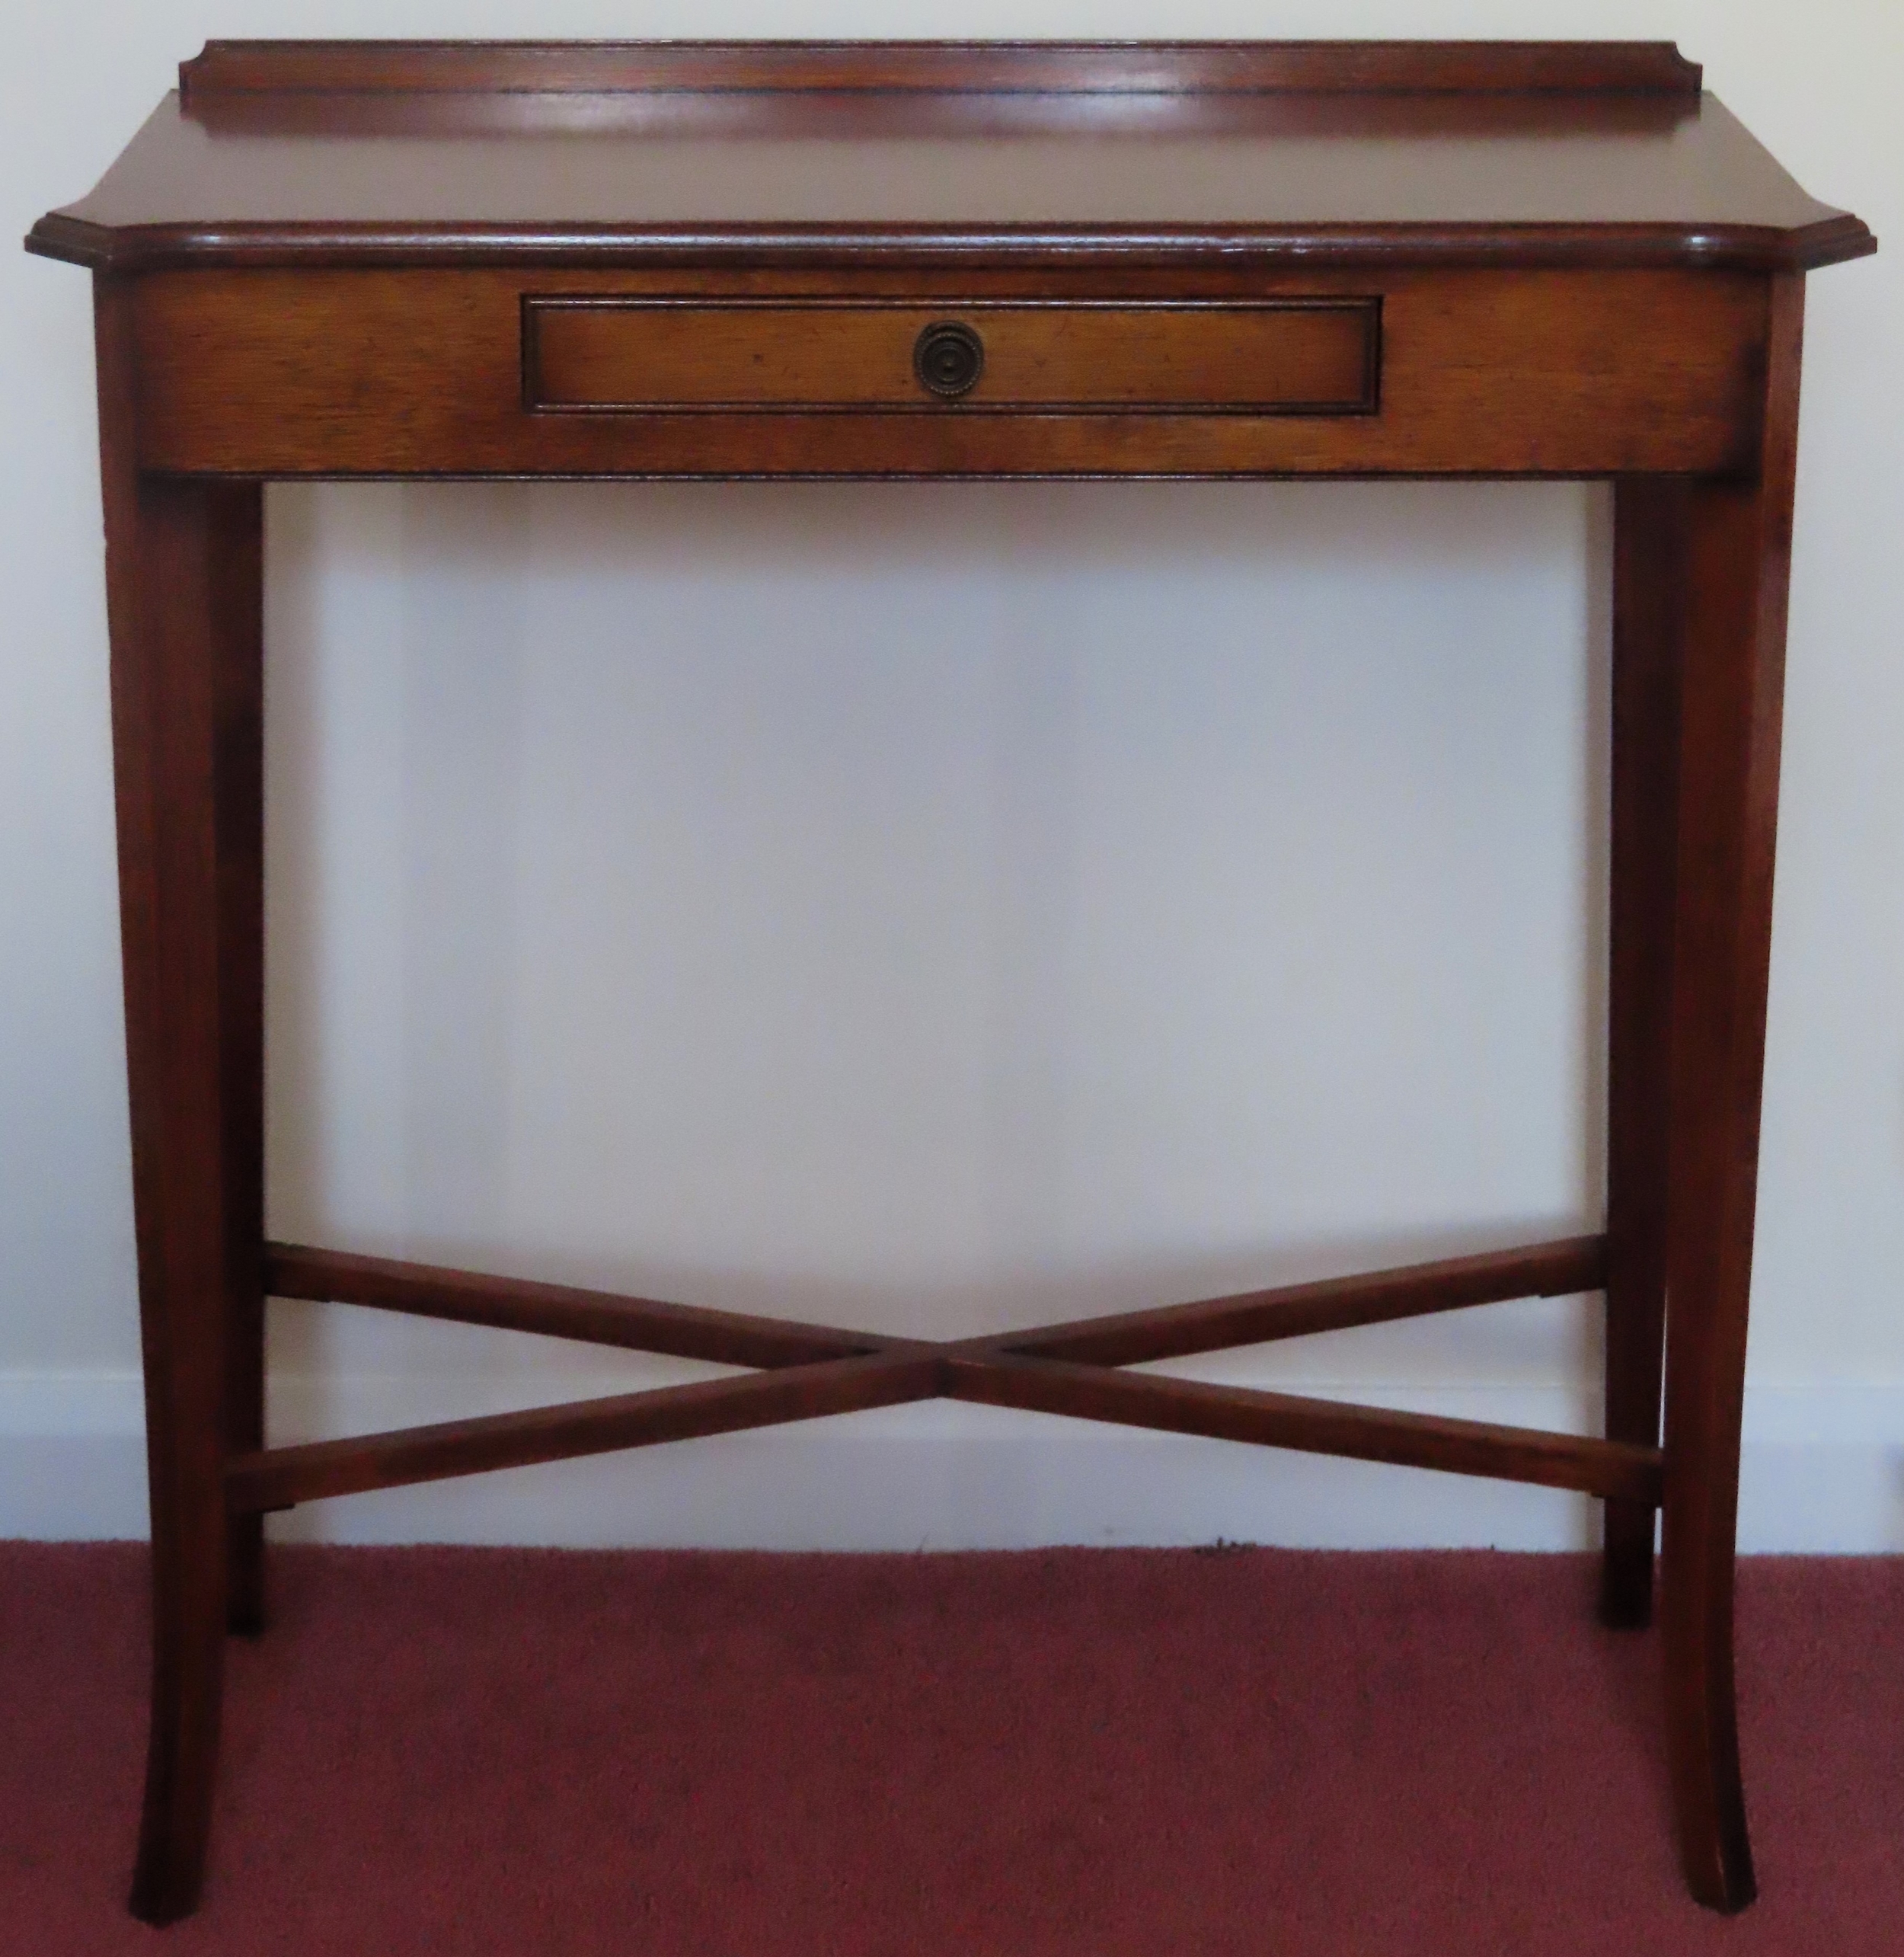 Small 20th century mahogany single drawer side table. Approx. 75 x 71 x 31cms reasonable used